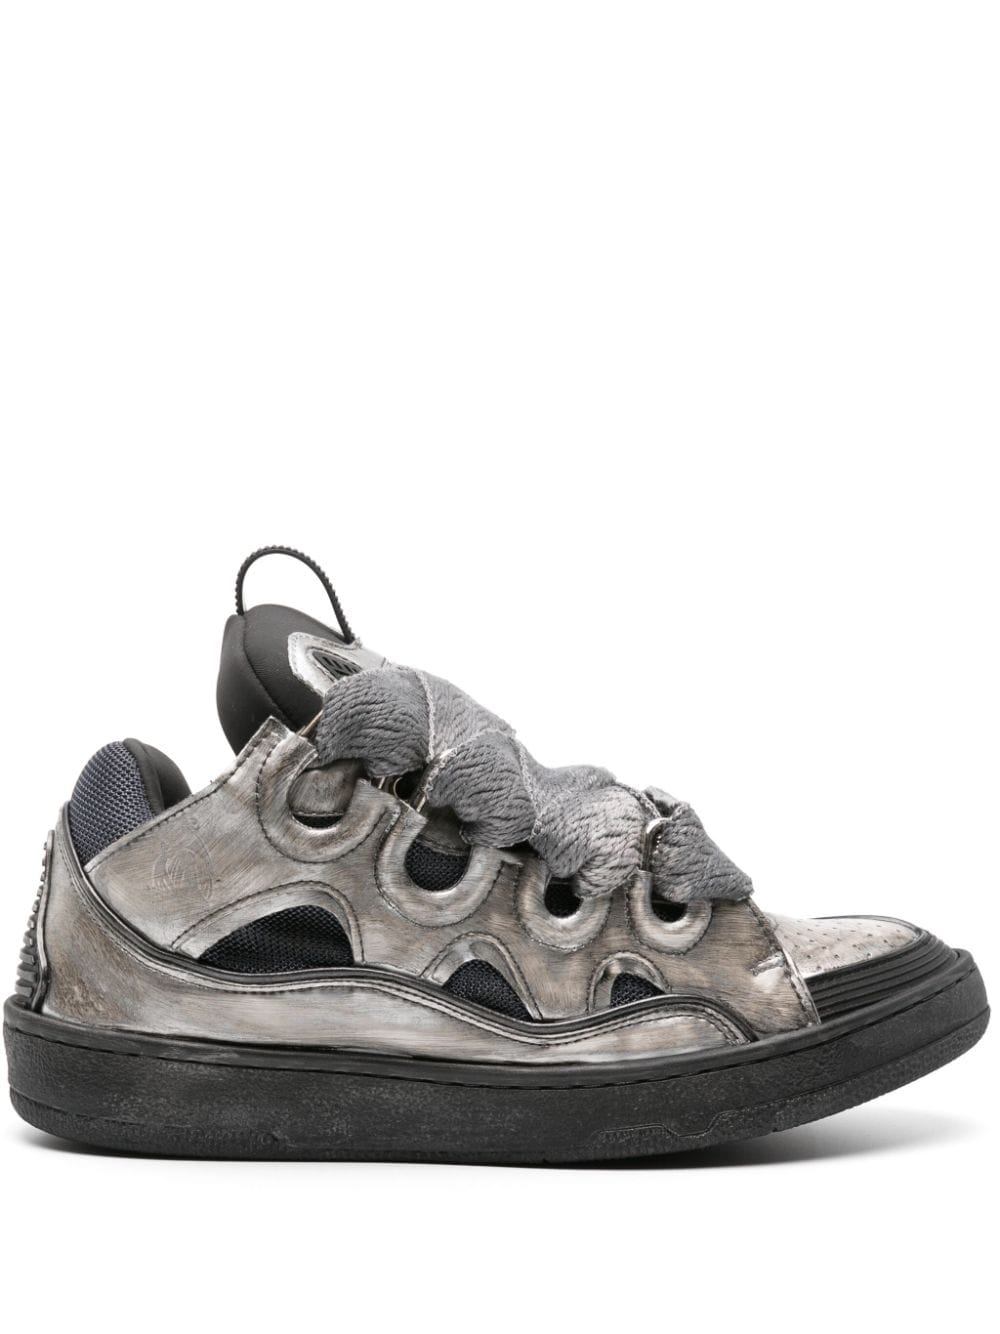 Lanvin Curb Chunky Leather Sneakers - Farfetch